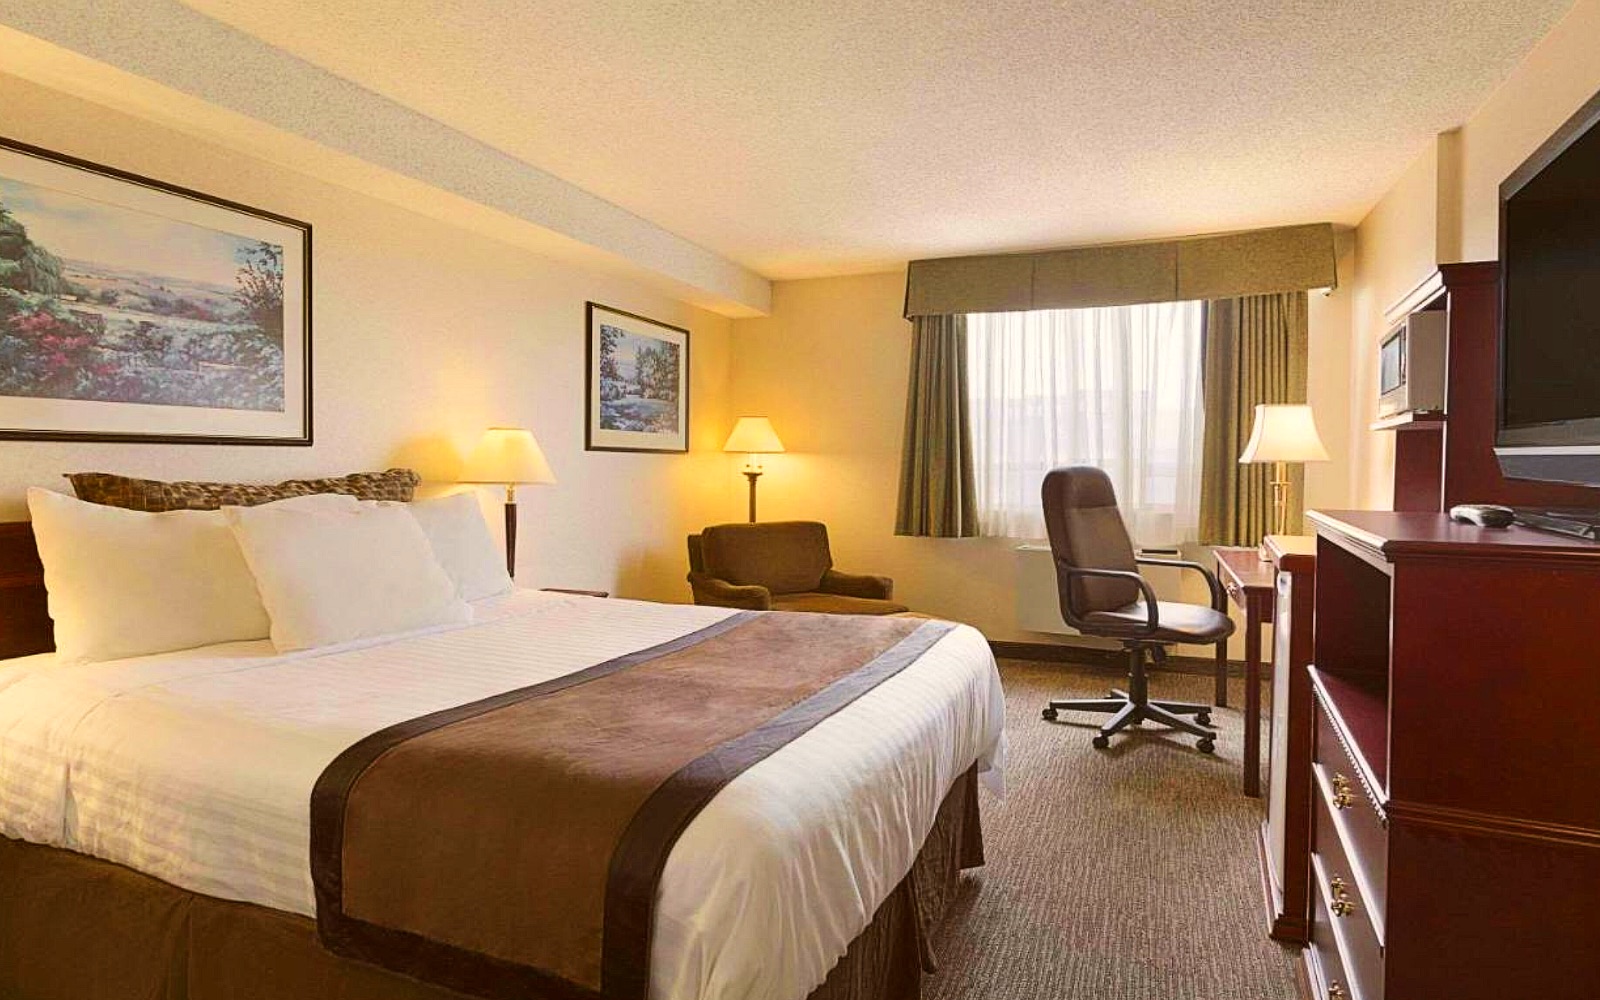 A room at the Travelodge Vancouver Airport